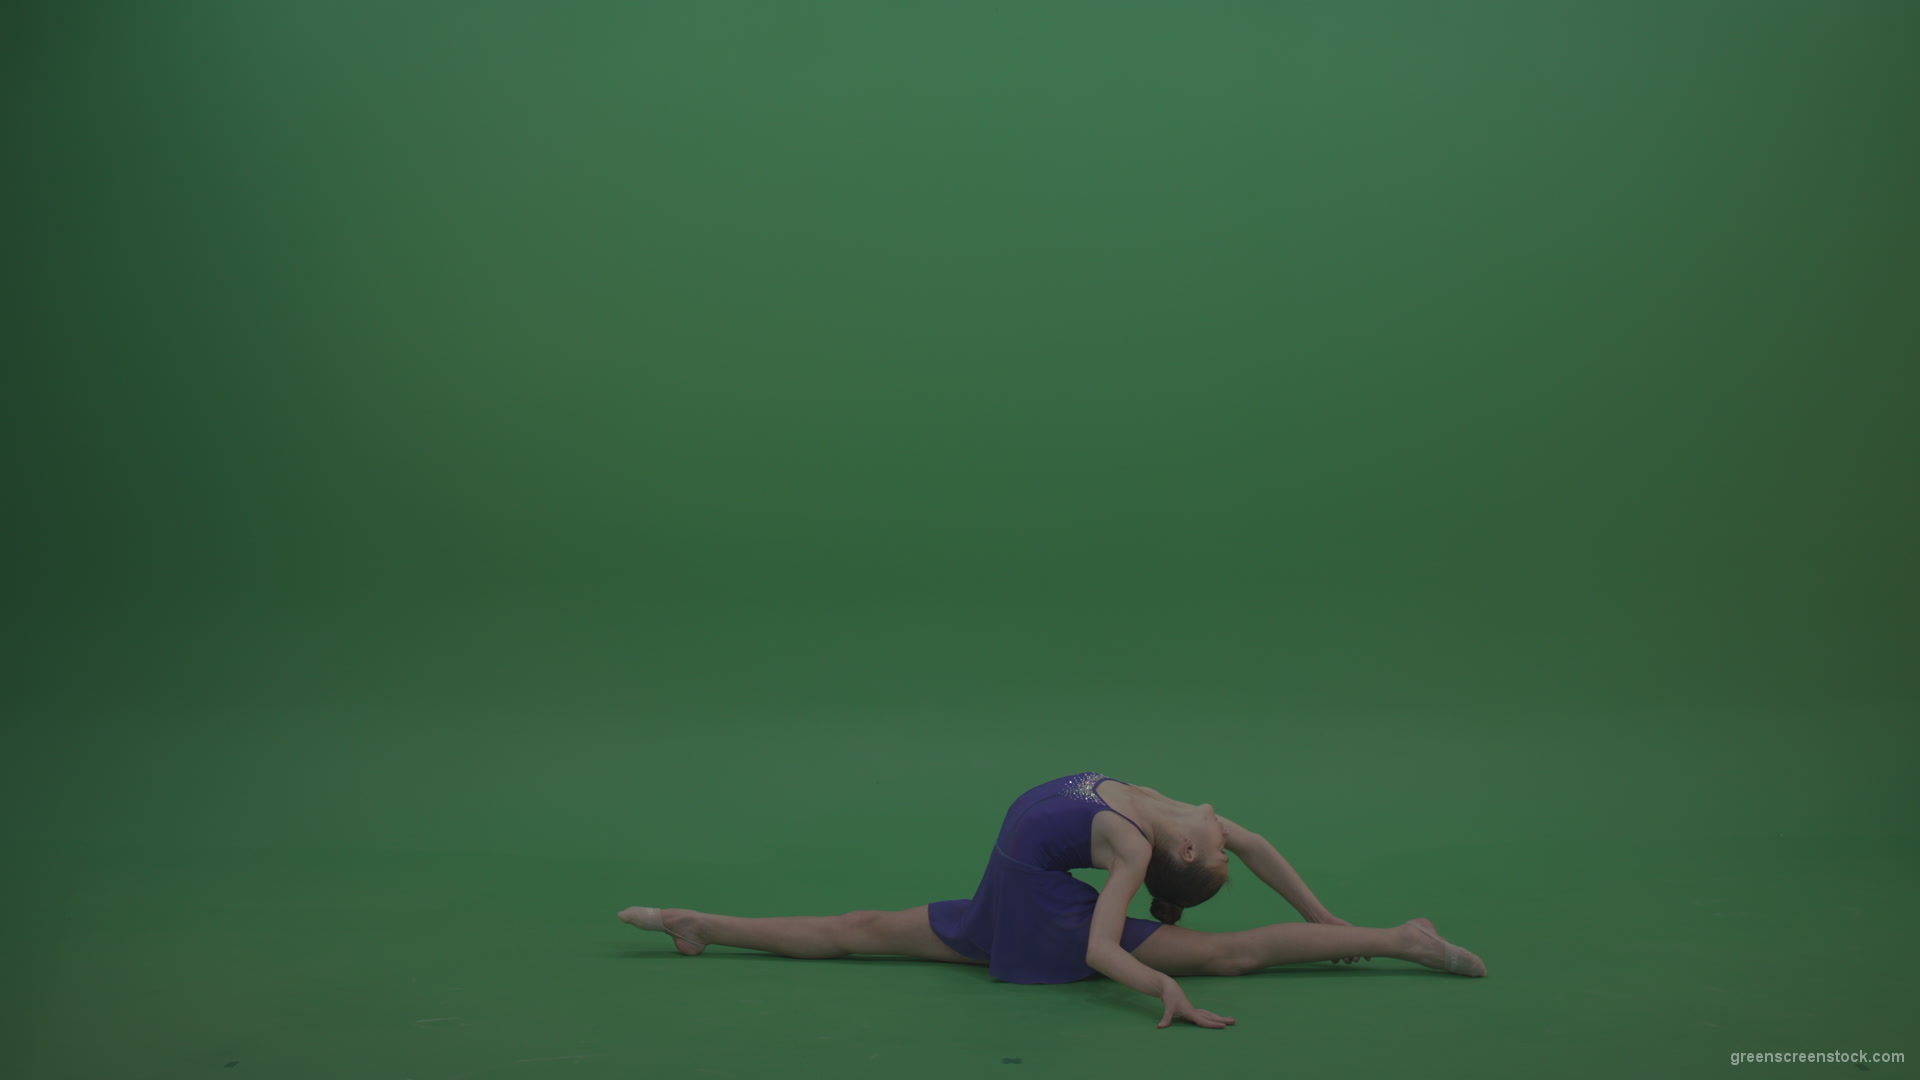 Cute_Athletic_Gymnast_Performing_Awesome_Split_Technique_Spin_Combination_With_Back_Handspring_On_Green_Screen_Chroma_Key_Wall_Background_004 Green Screen Stock